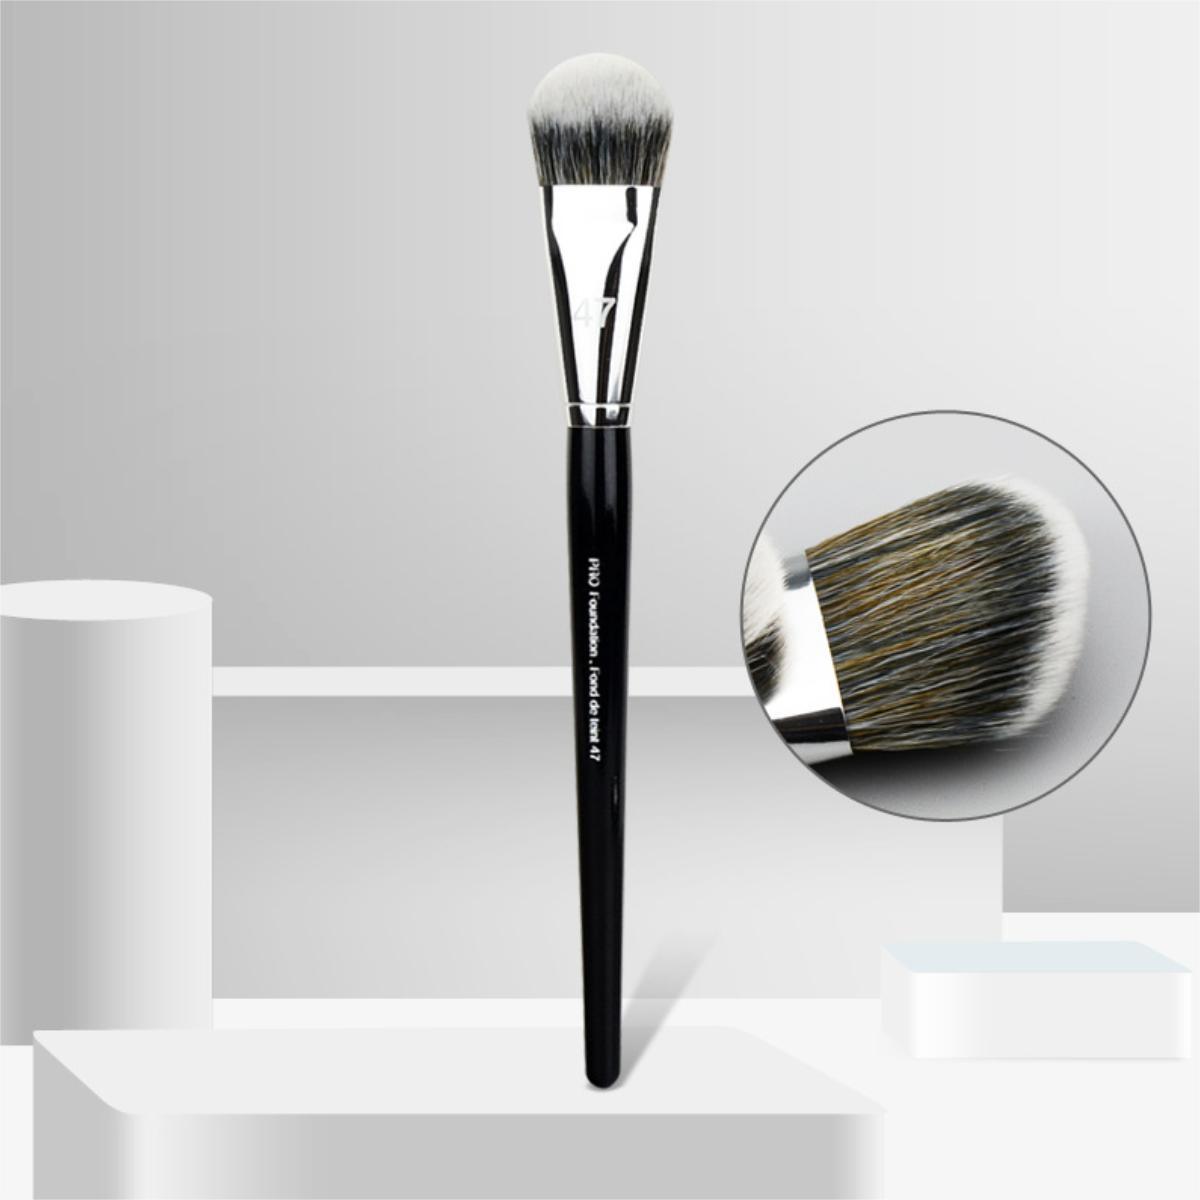 Makeup Brush with Lid, Fibrous Bristle Broom-shaped Foundation Brush Beauty Tools